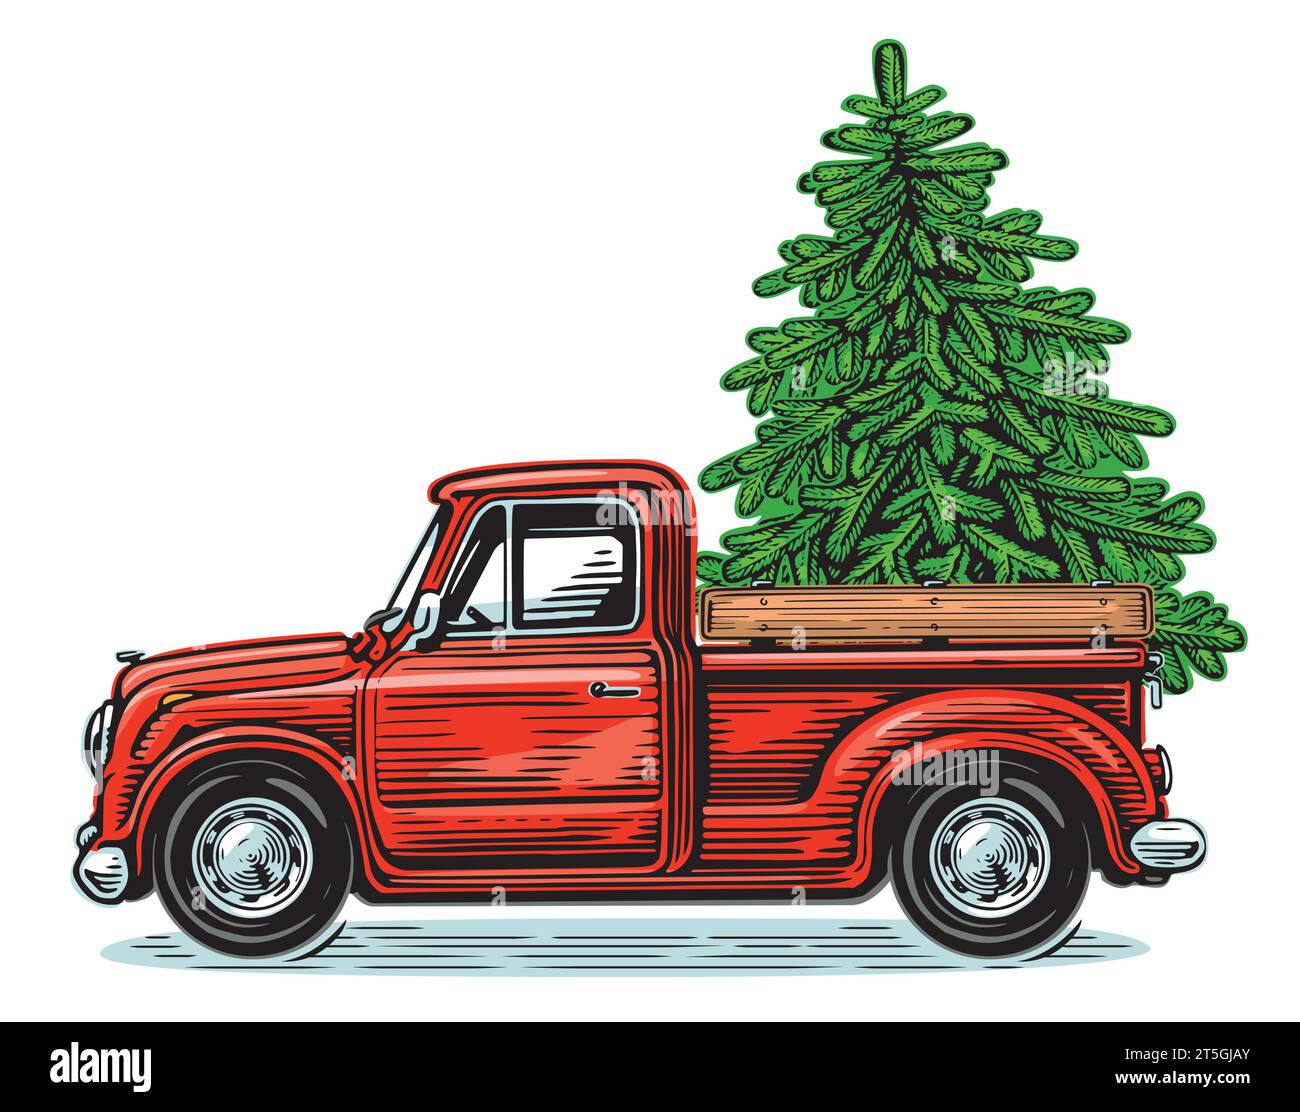 Christmas red retro pick-up truck with green pine tree. Happy holidays, vector illustration Stock Vector